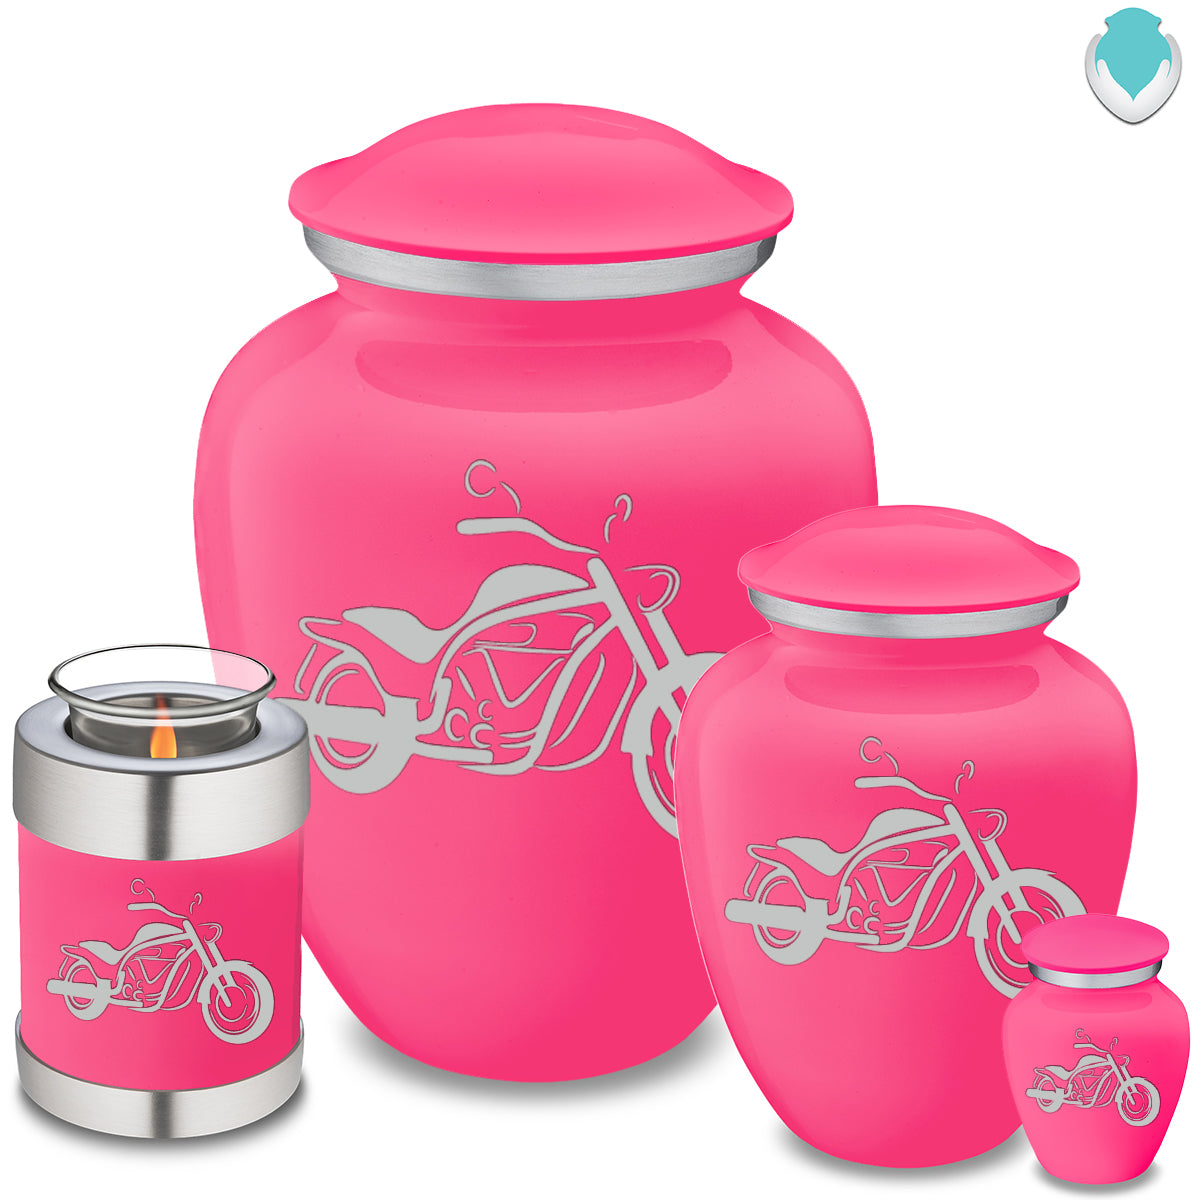 Adult Embrace Bright Pink Motorcycle Cremation Urn